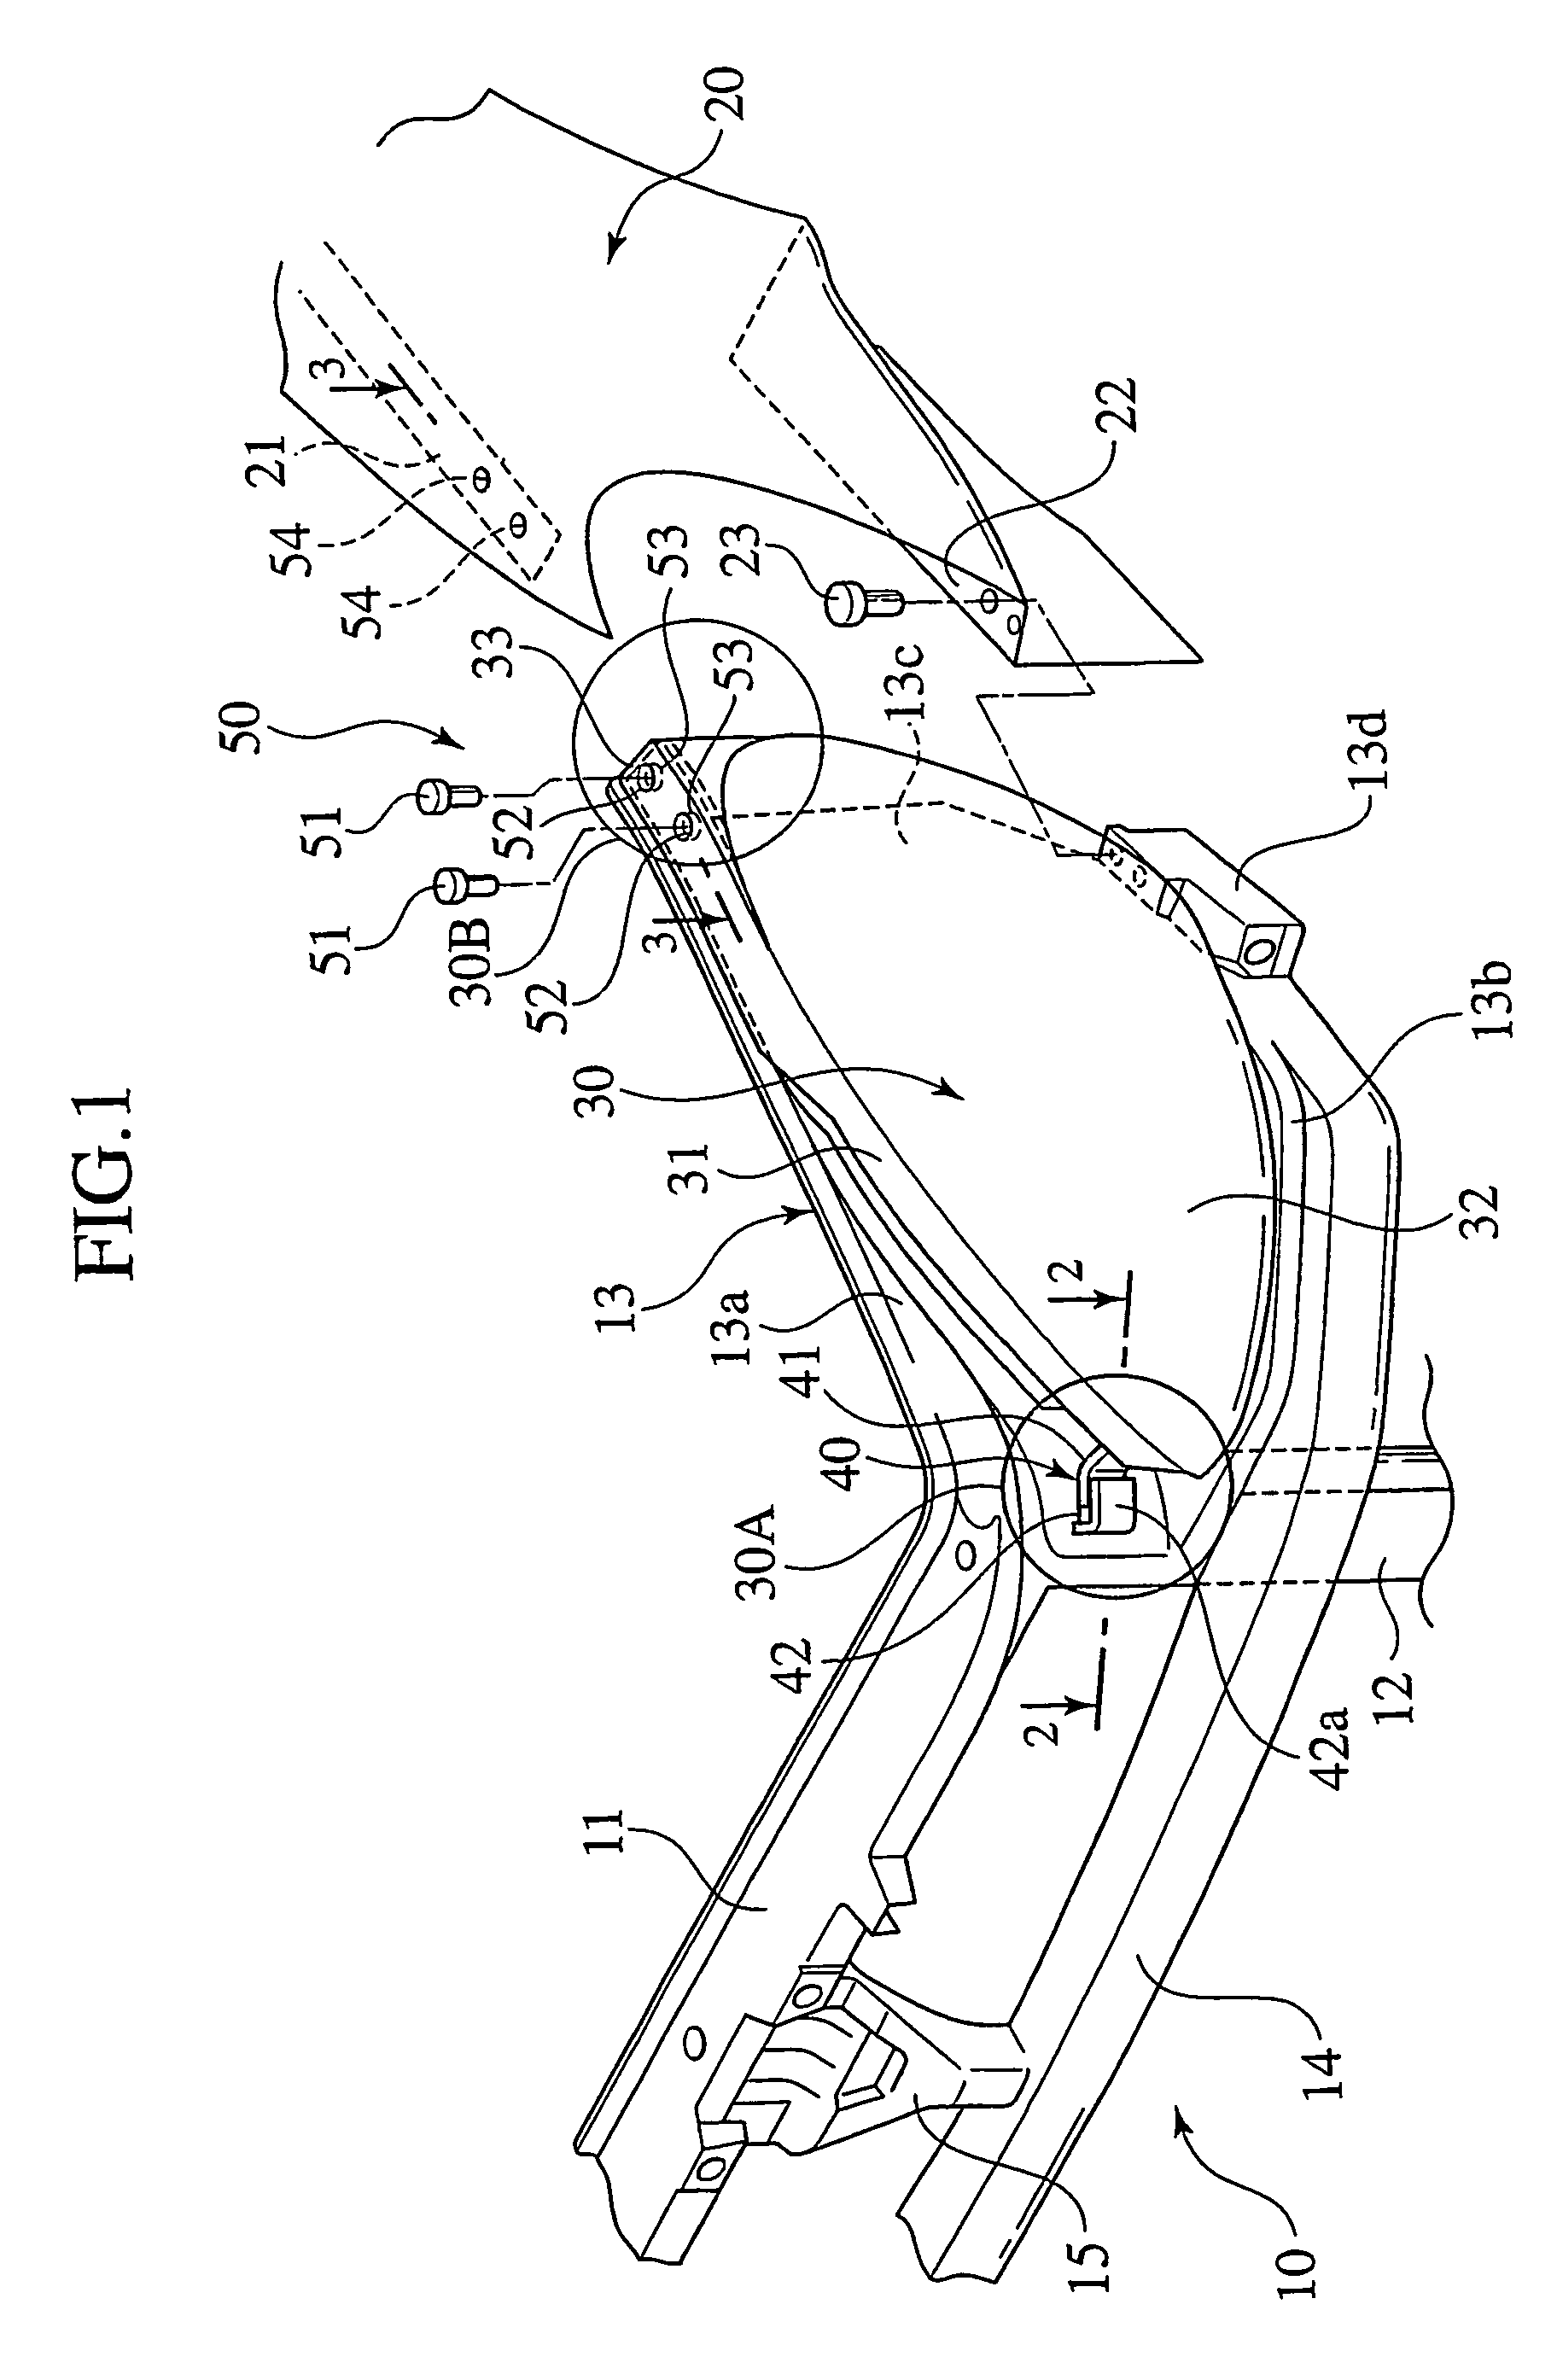 Headlamp mounting structure for automobile